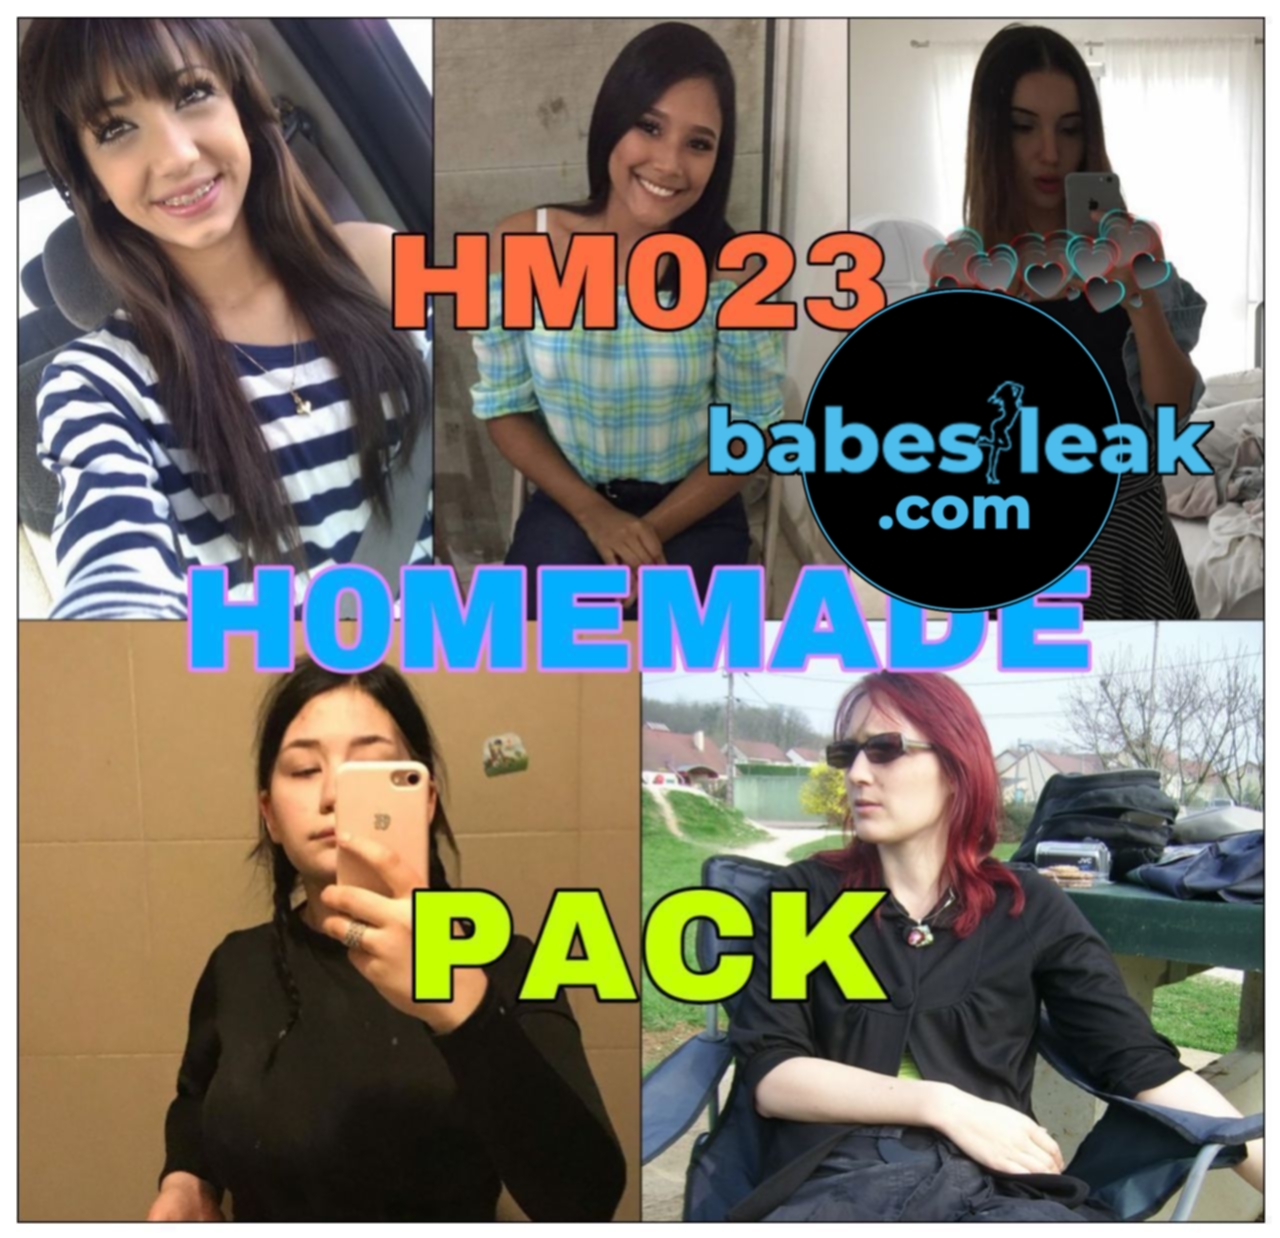 15 Albums Homemade Statewins Leak Pack Hm023 Onlyfans Leaks Snapchat Leaks Statewins Leaks 3293